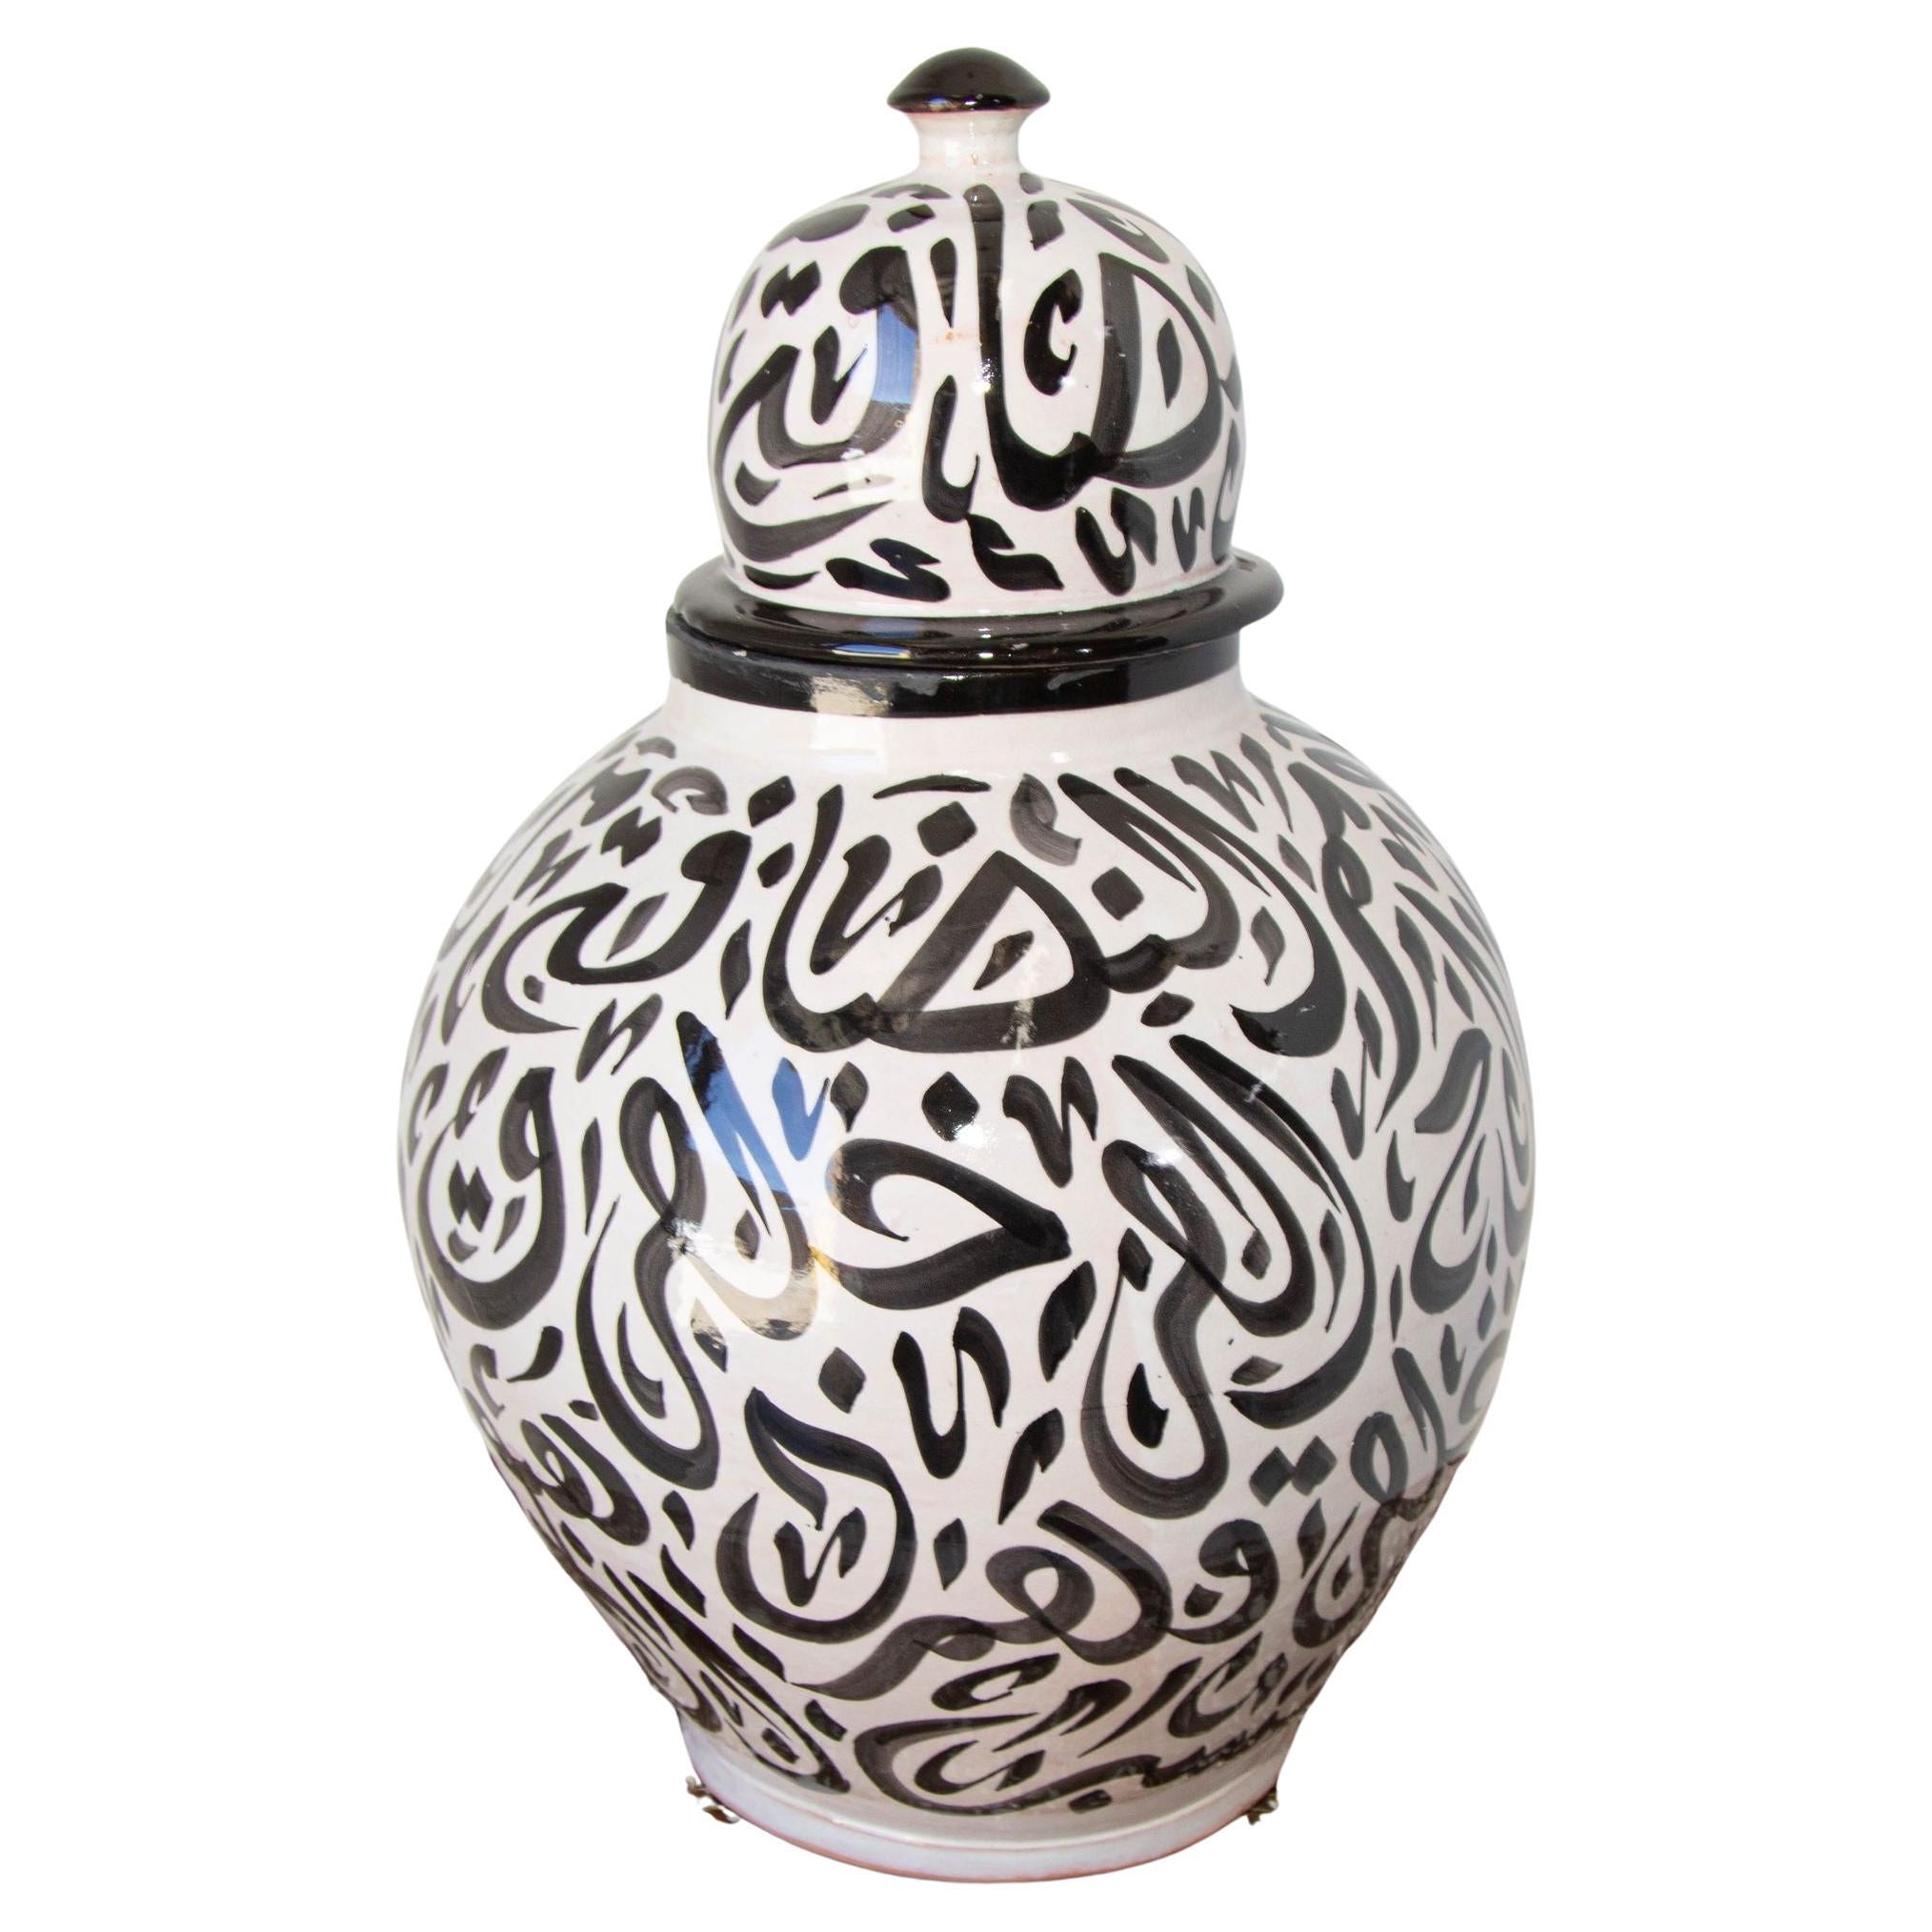 Moroccan Ceramic Lidded Urn with Arabic Calligraphy Black Writing, Fez